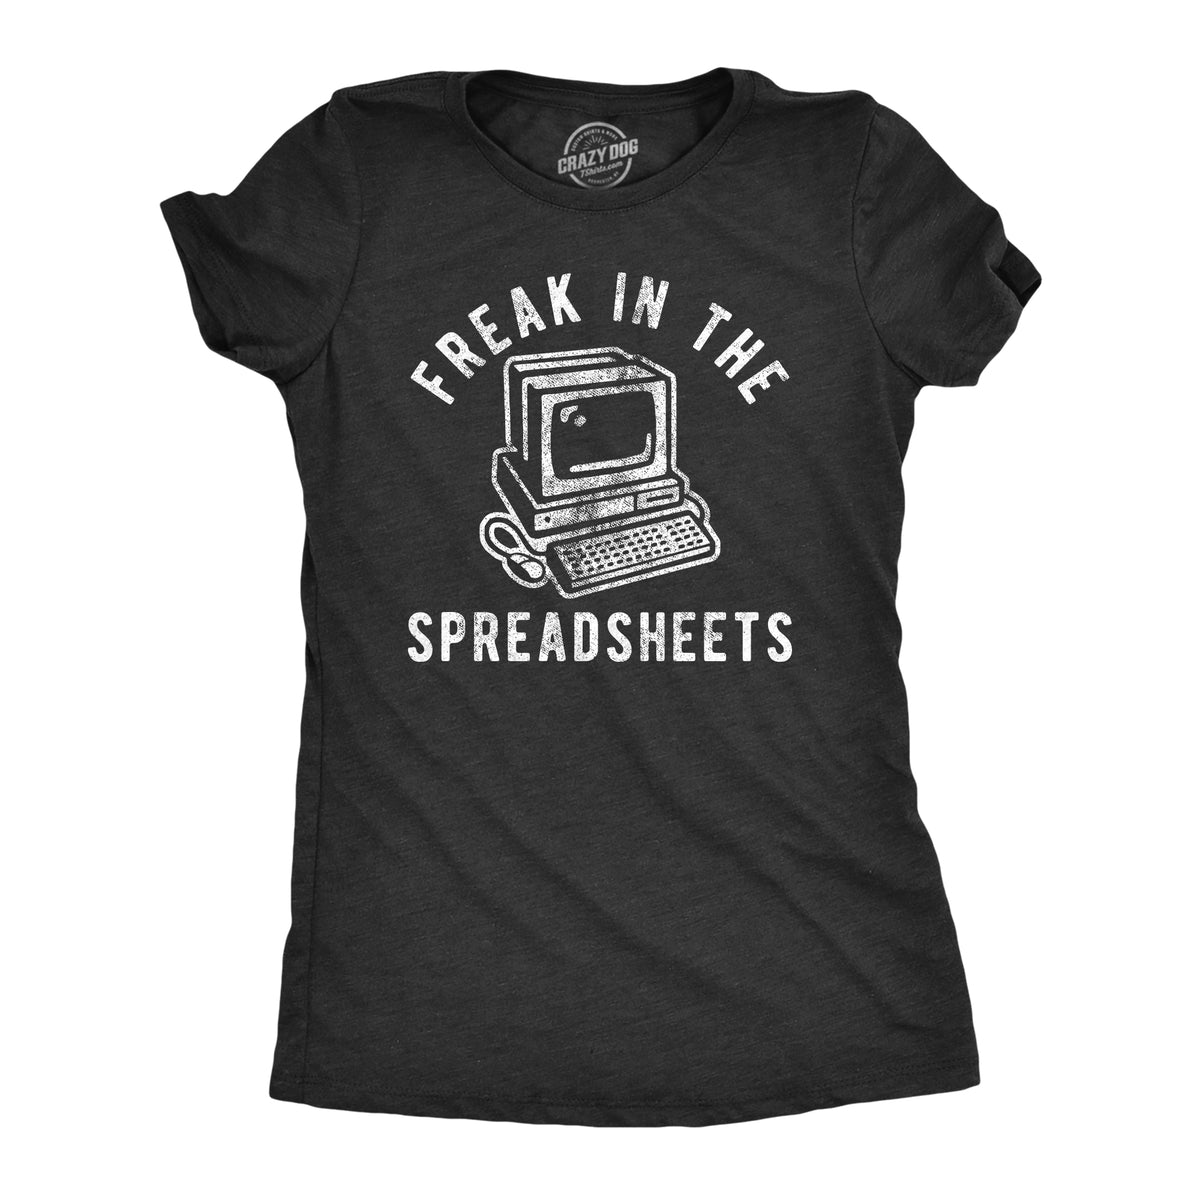 Funny Heather Black - Speadsheets Freak In The Spreadsheets Womens T Shirt Nerdy Nerdy Office sarcastic Tee